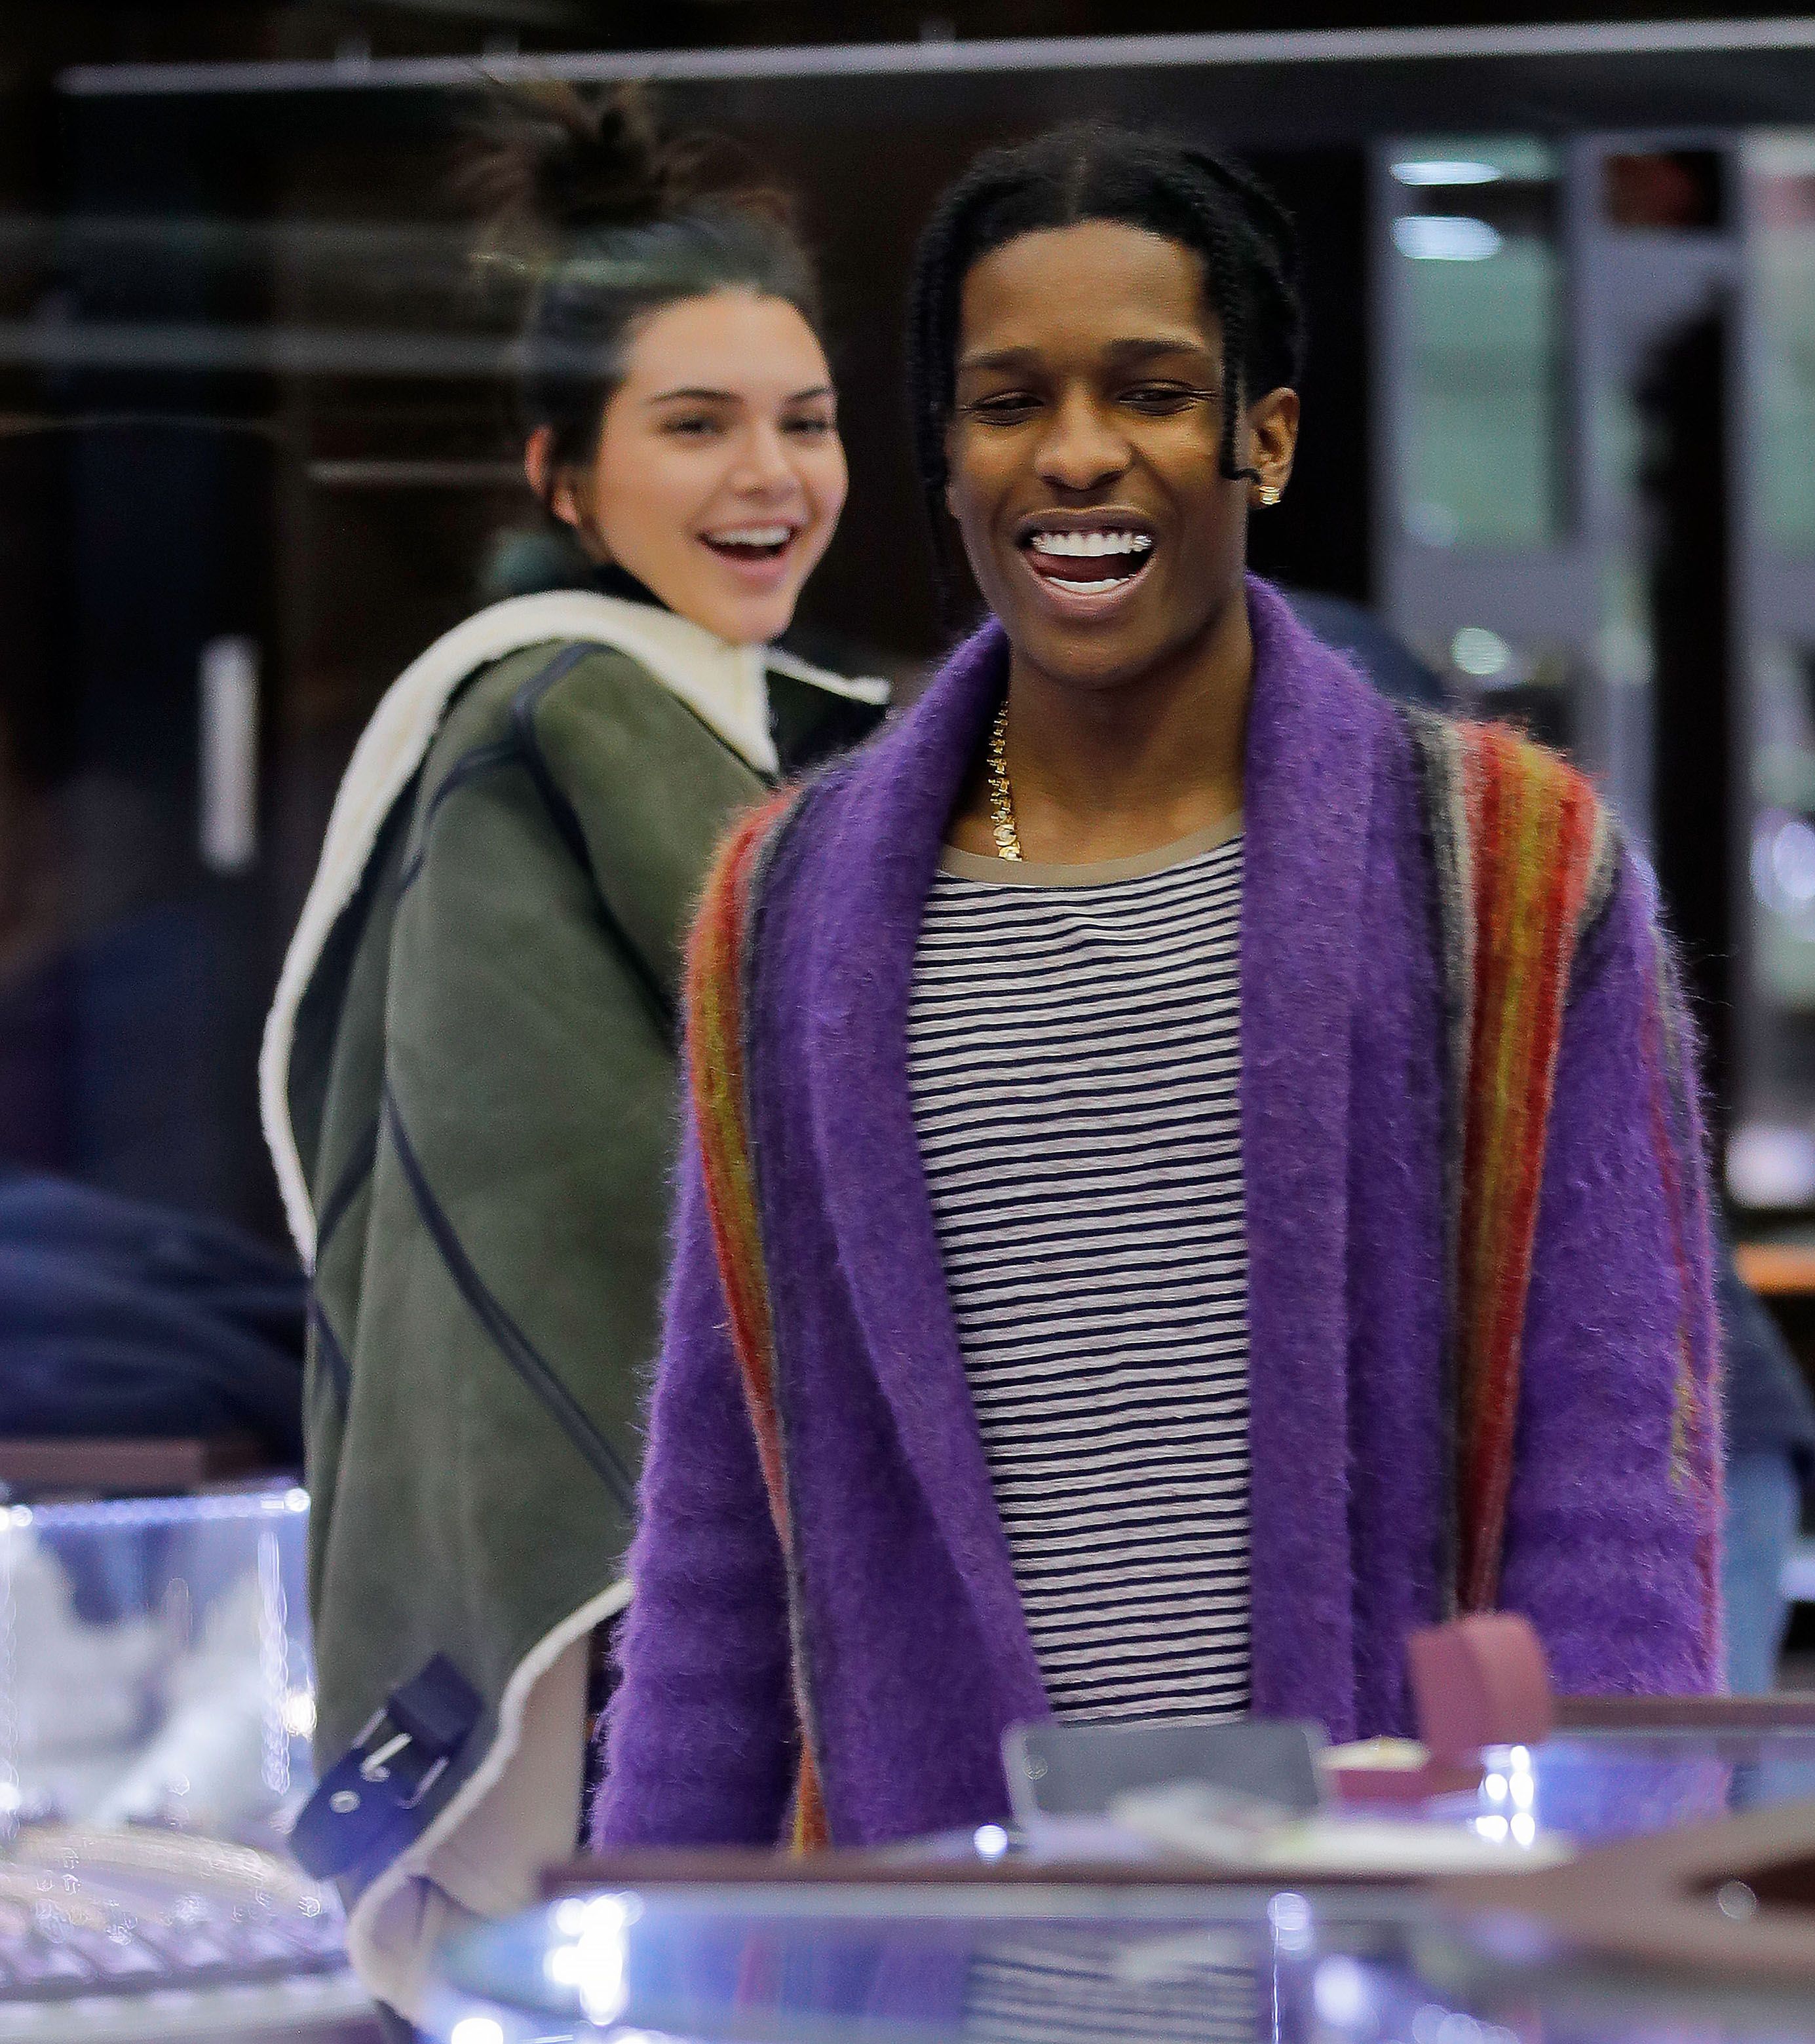 When did A$AP Rocky and Kendall Jenner date?